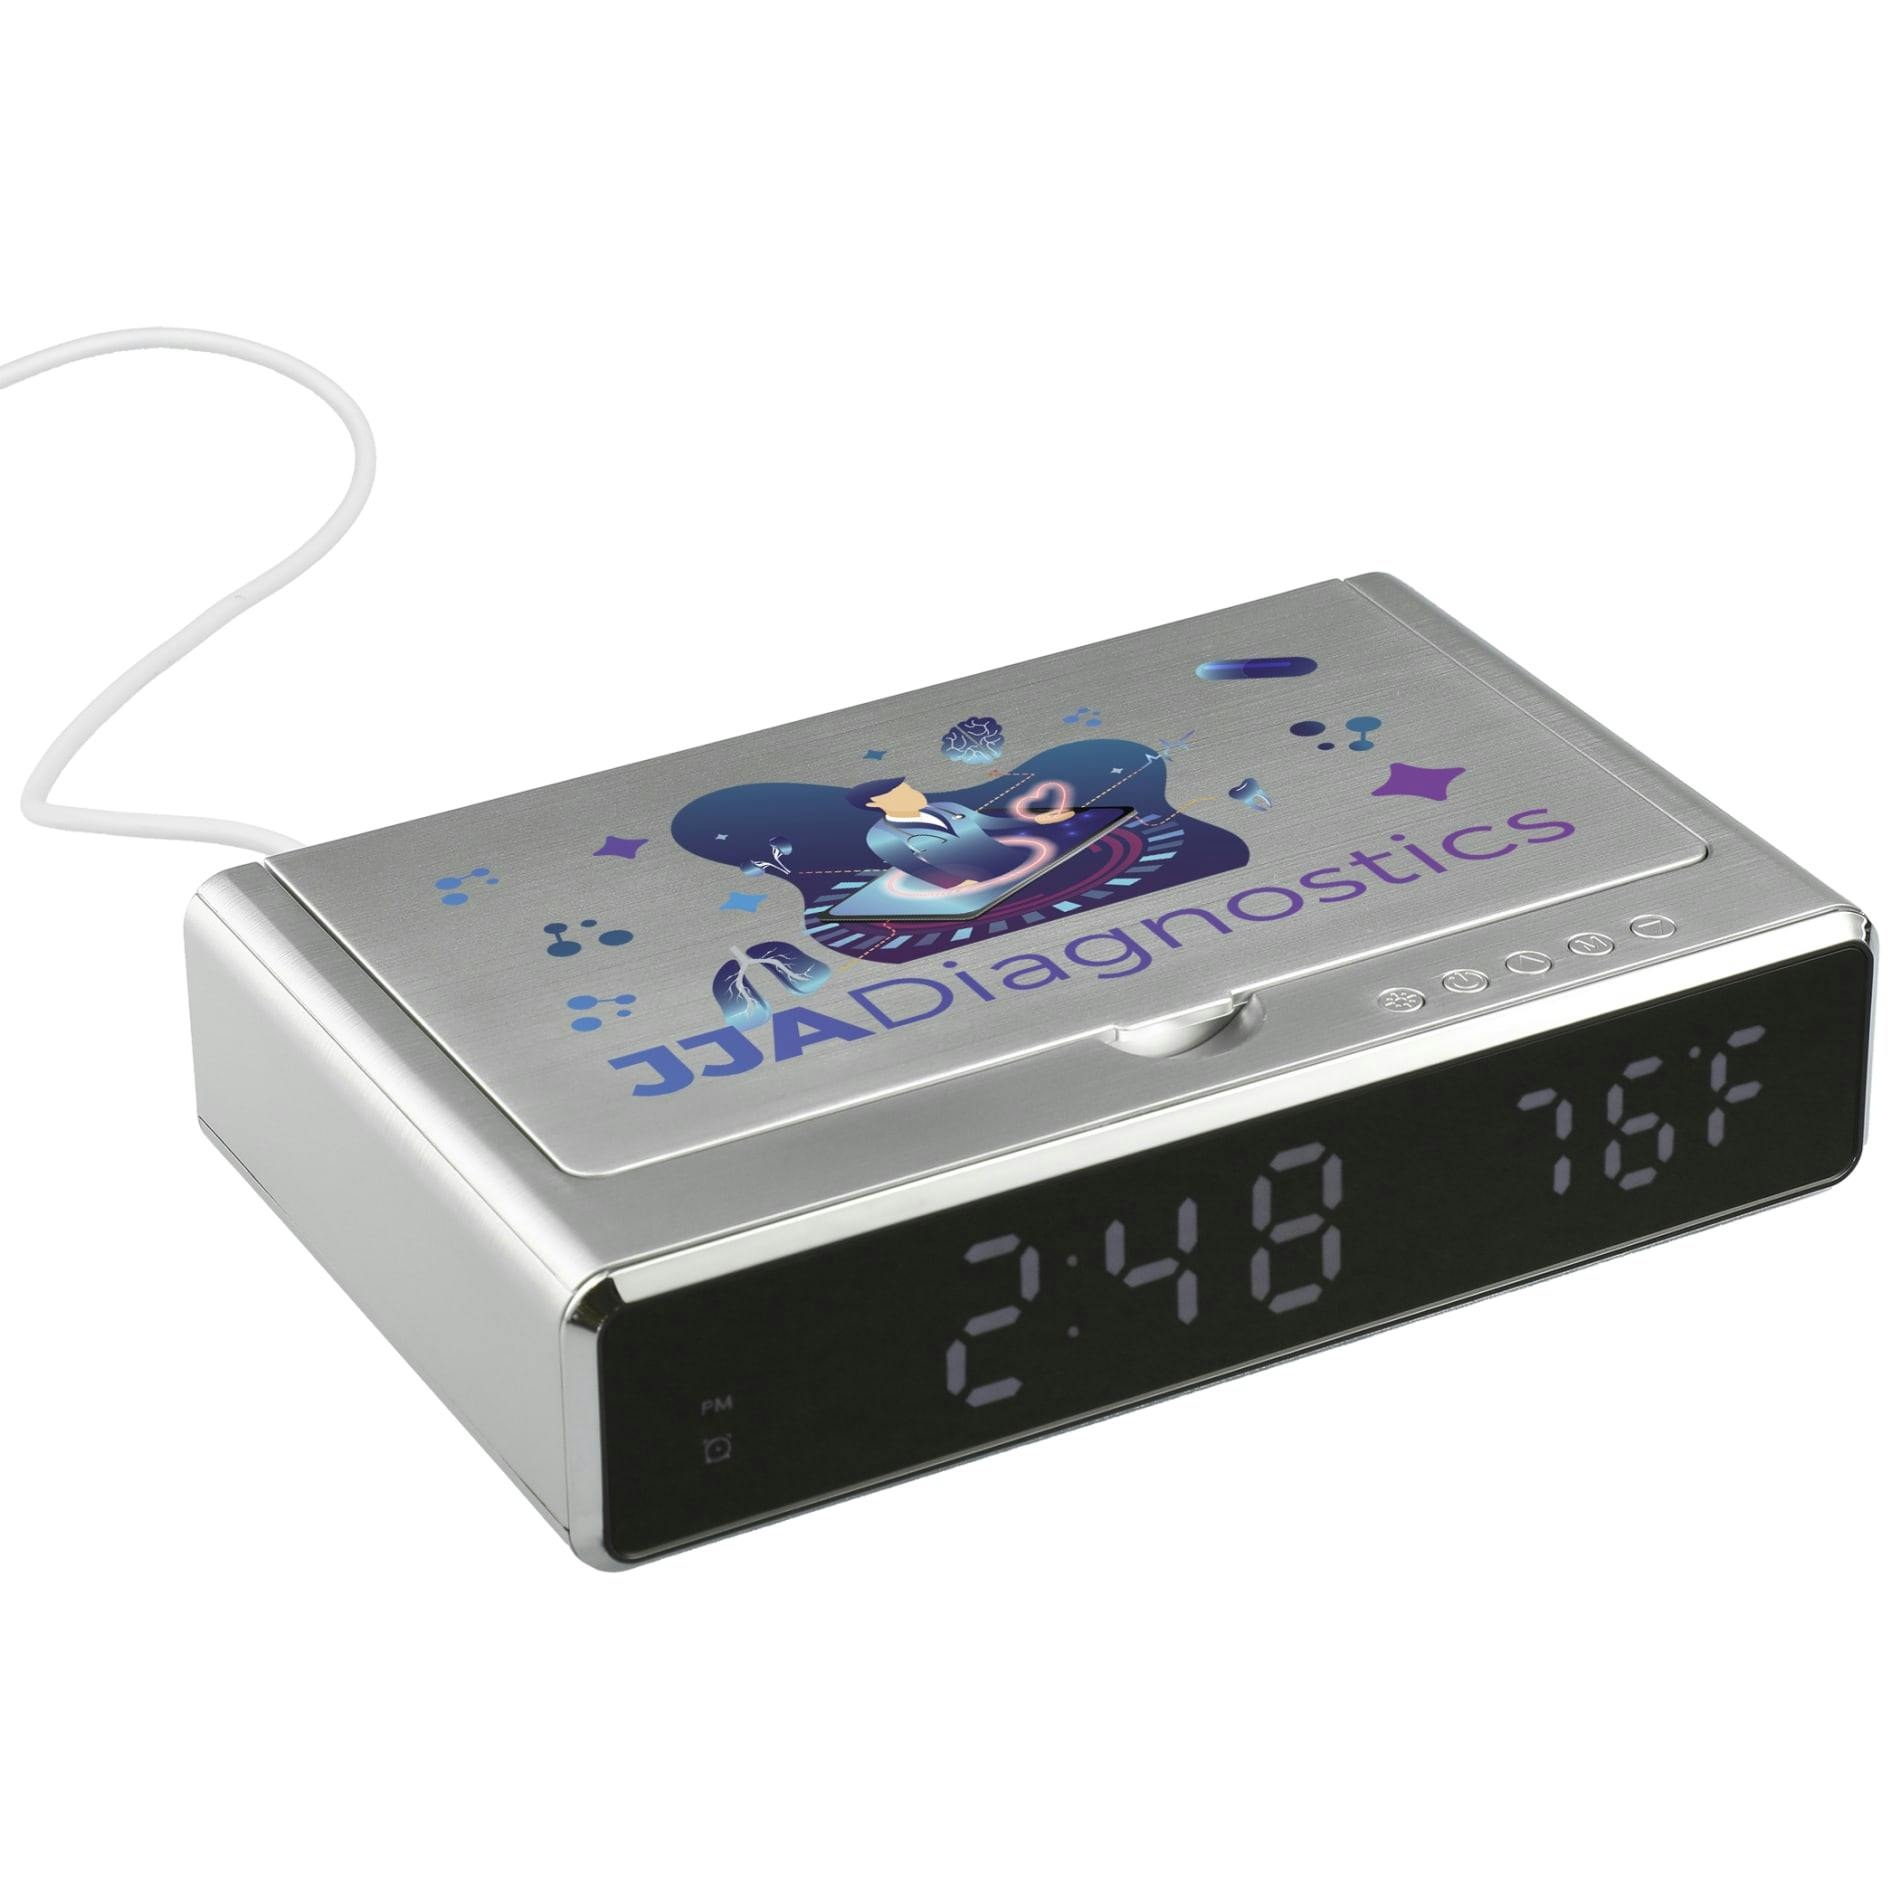 UV Sanitizer Desk Clock with Wireless Charging - additional Image 5